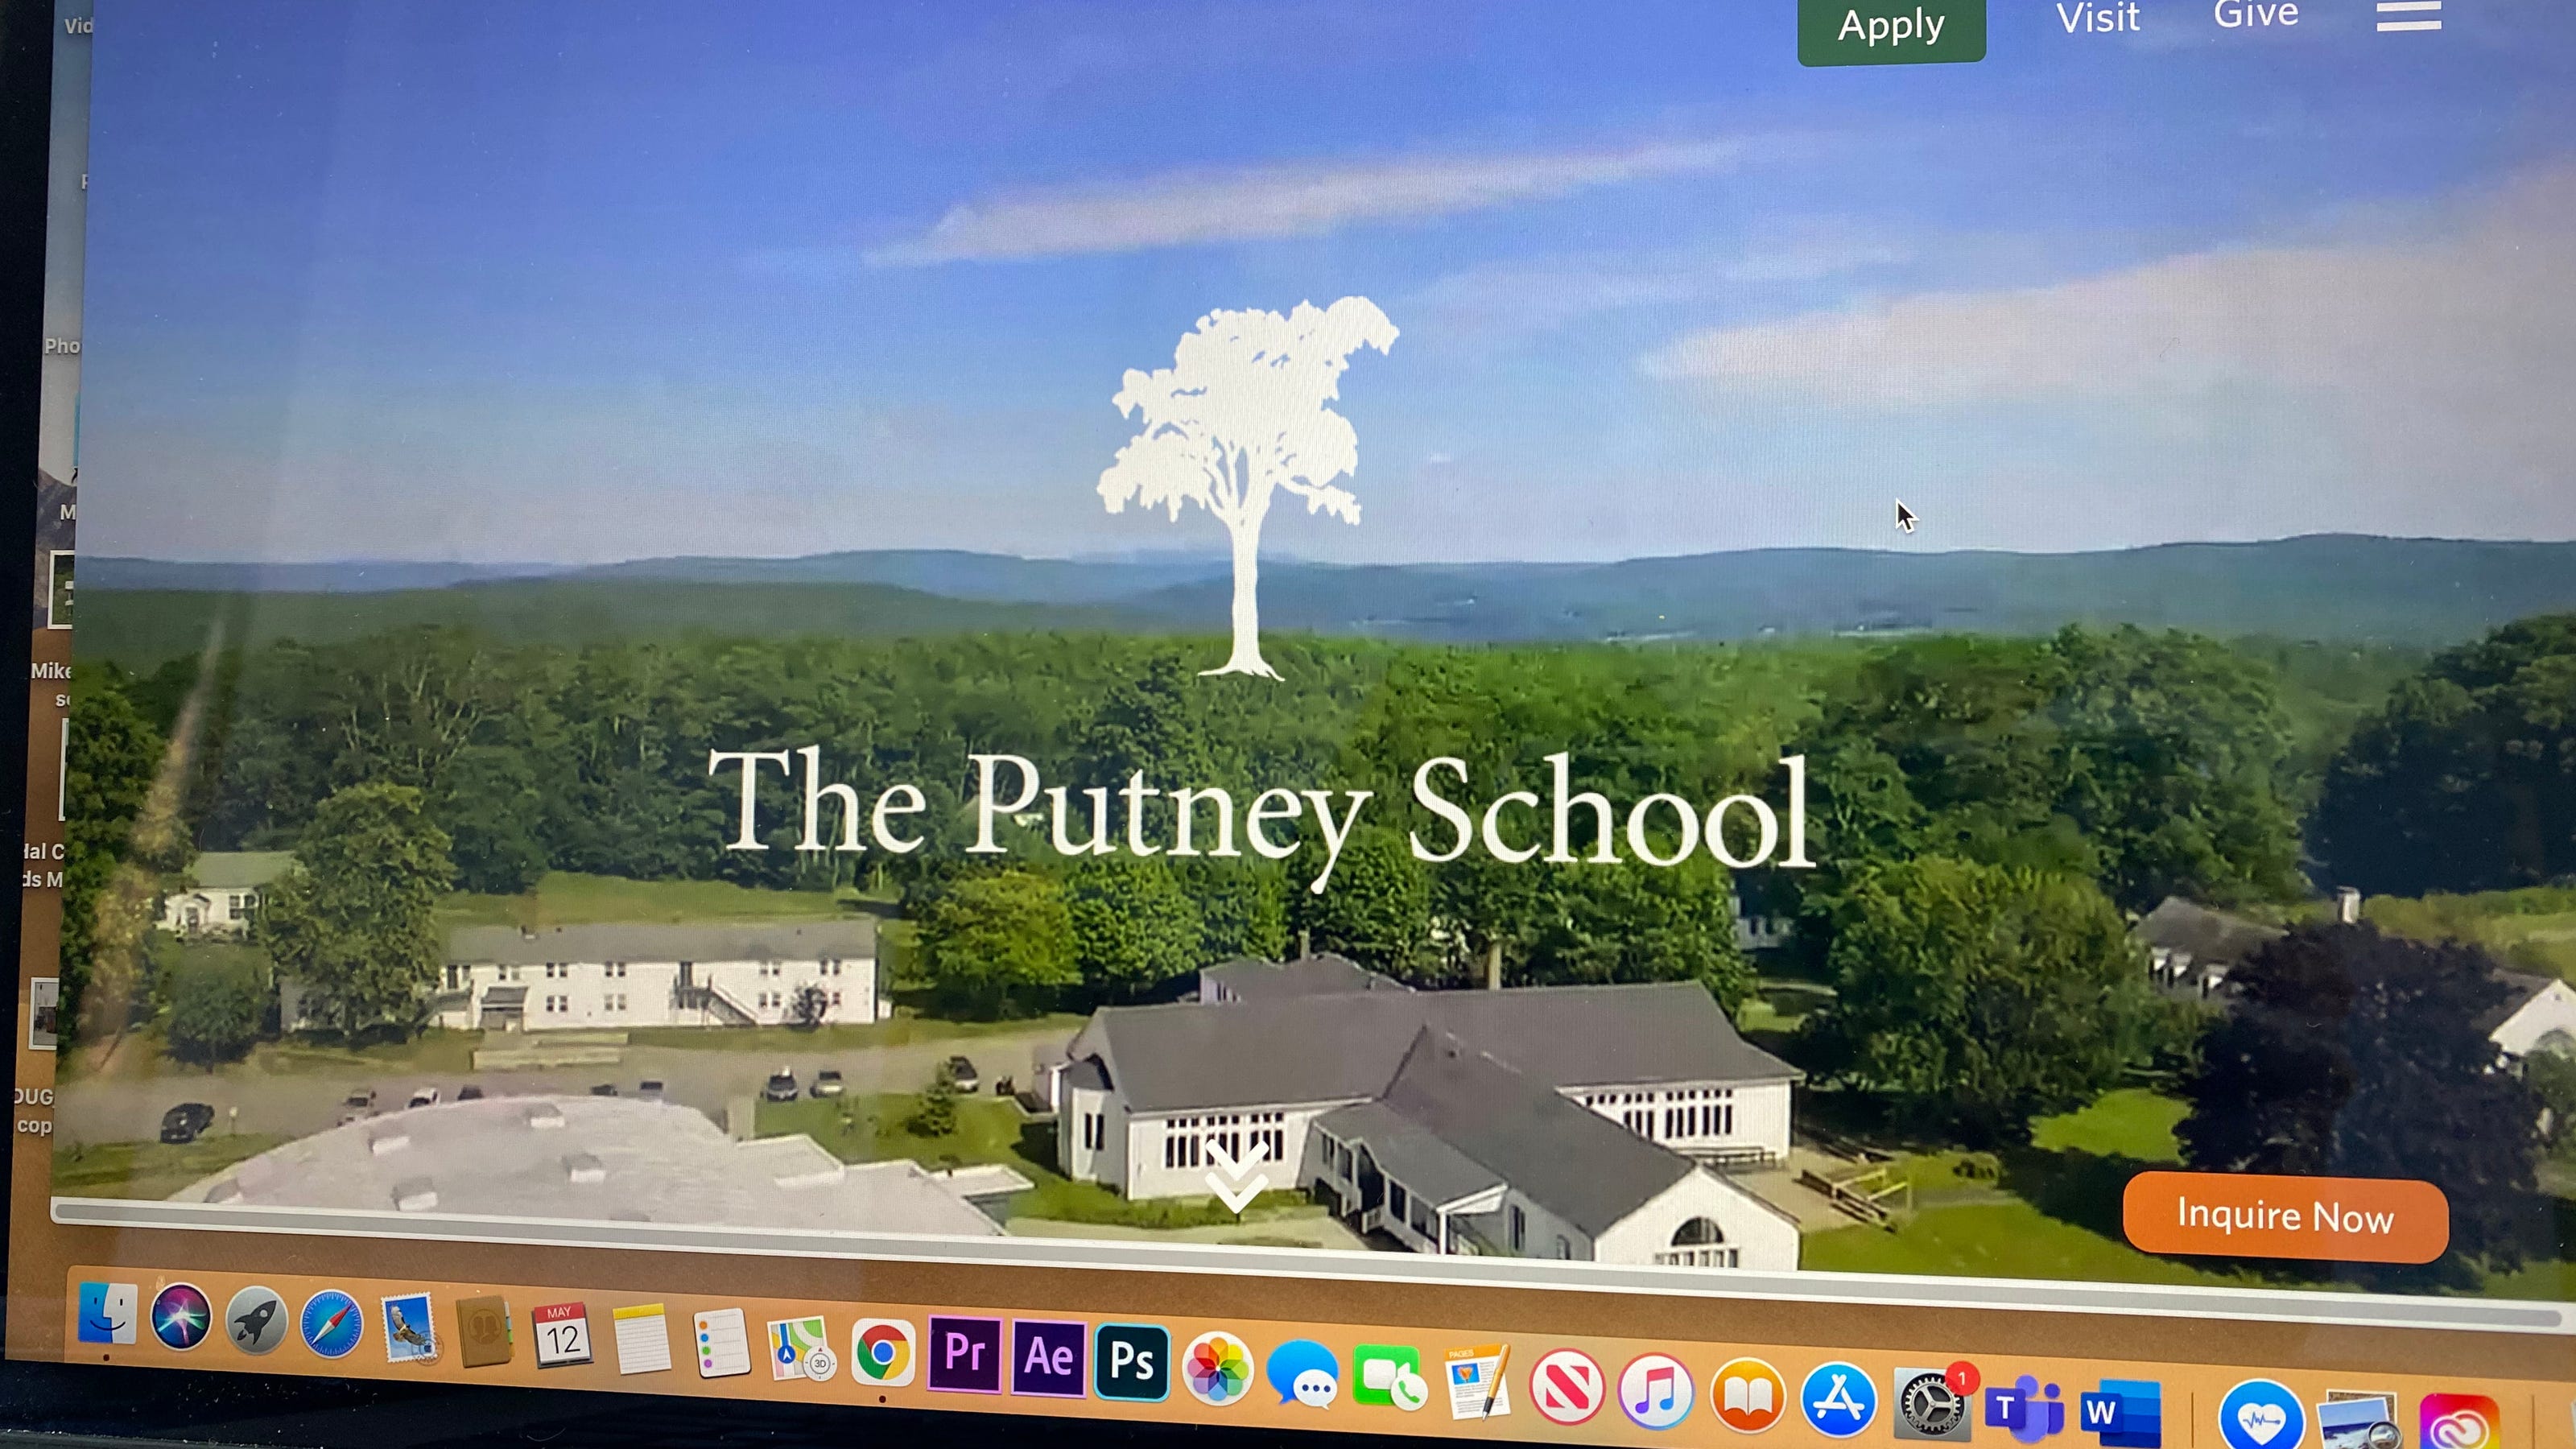   
																Why one Vermont school is considered among the 50 most influential high schools 
															 